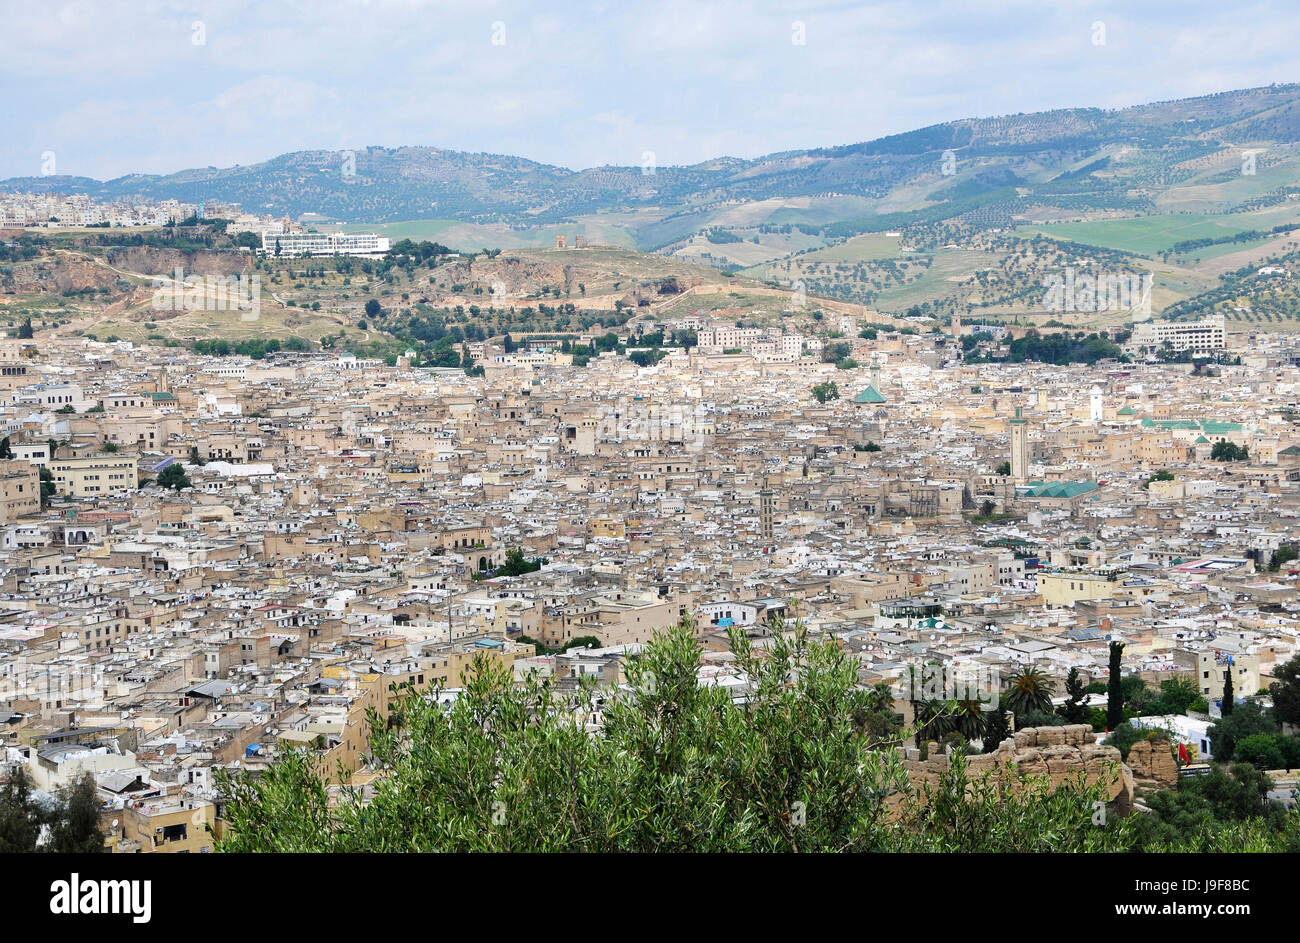 africa, north africa, morocco, historical, city, town, hill, africa, north Stock Photo